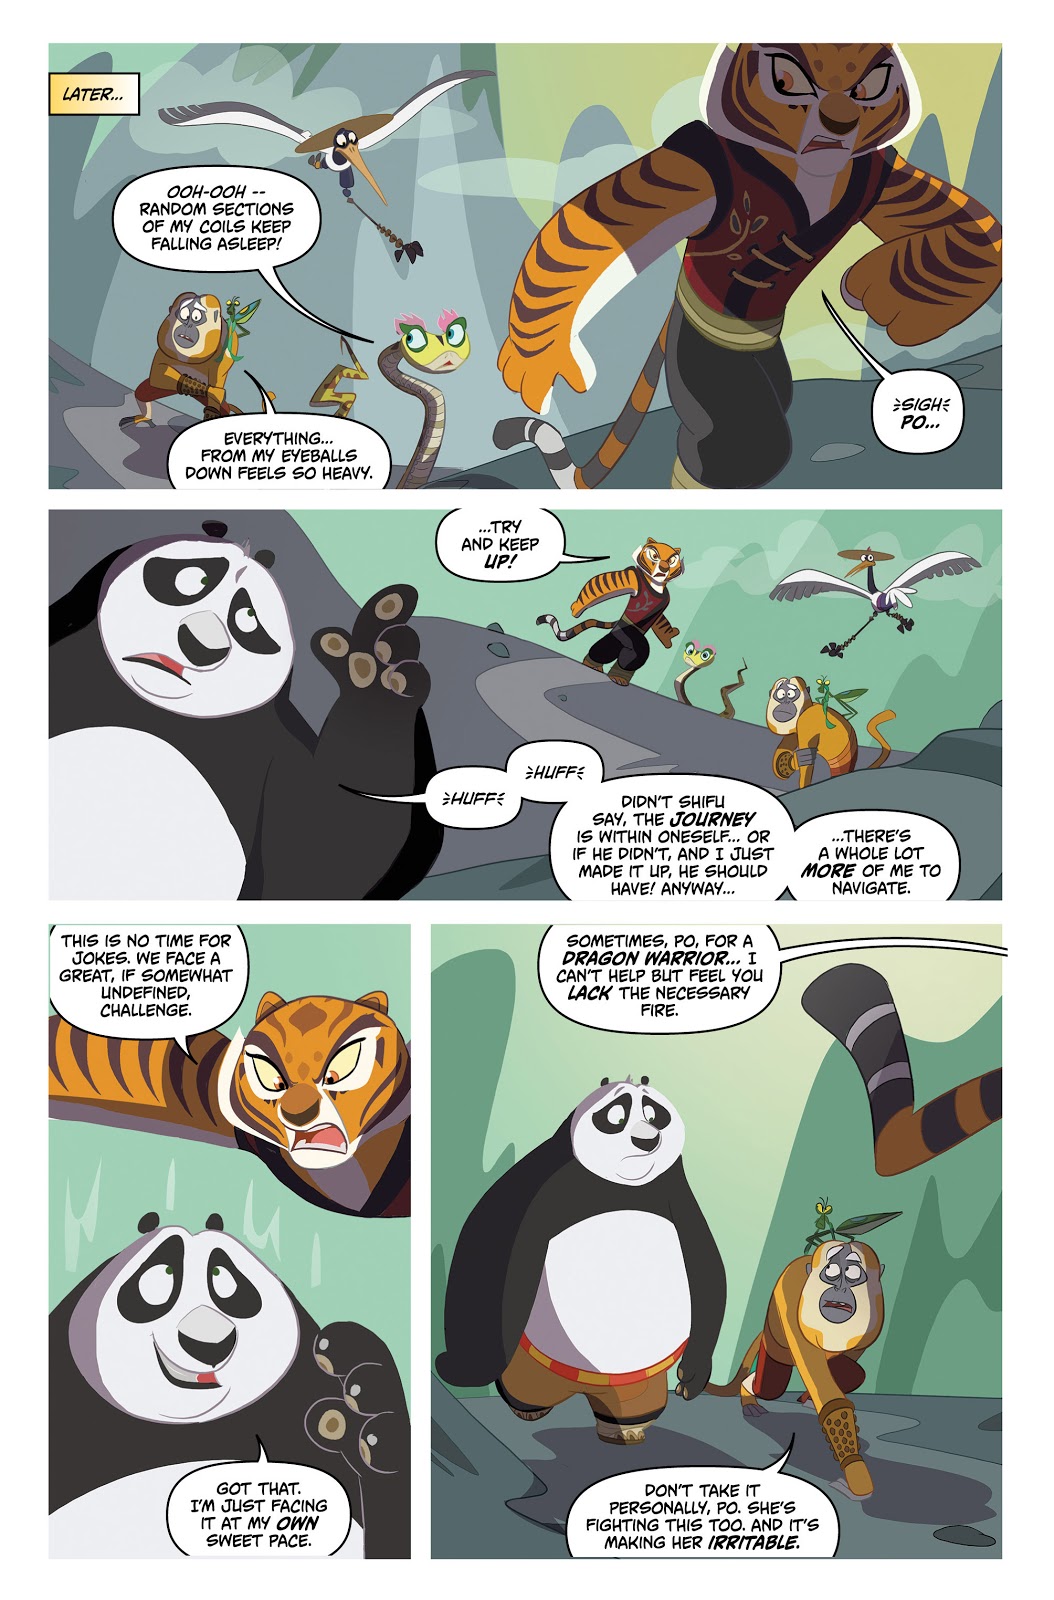 Why Kung Fu Panda is so abused by DreamWorks by LotDarkos on DeviantArt